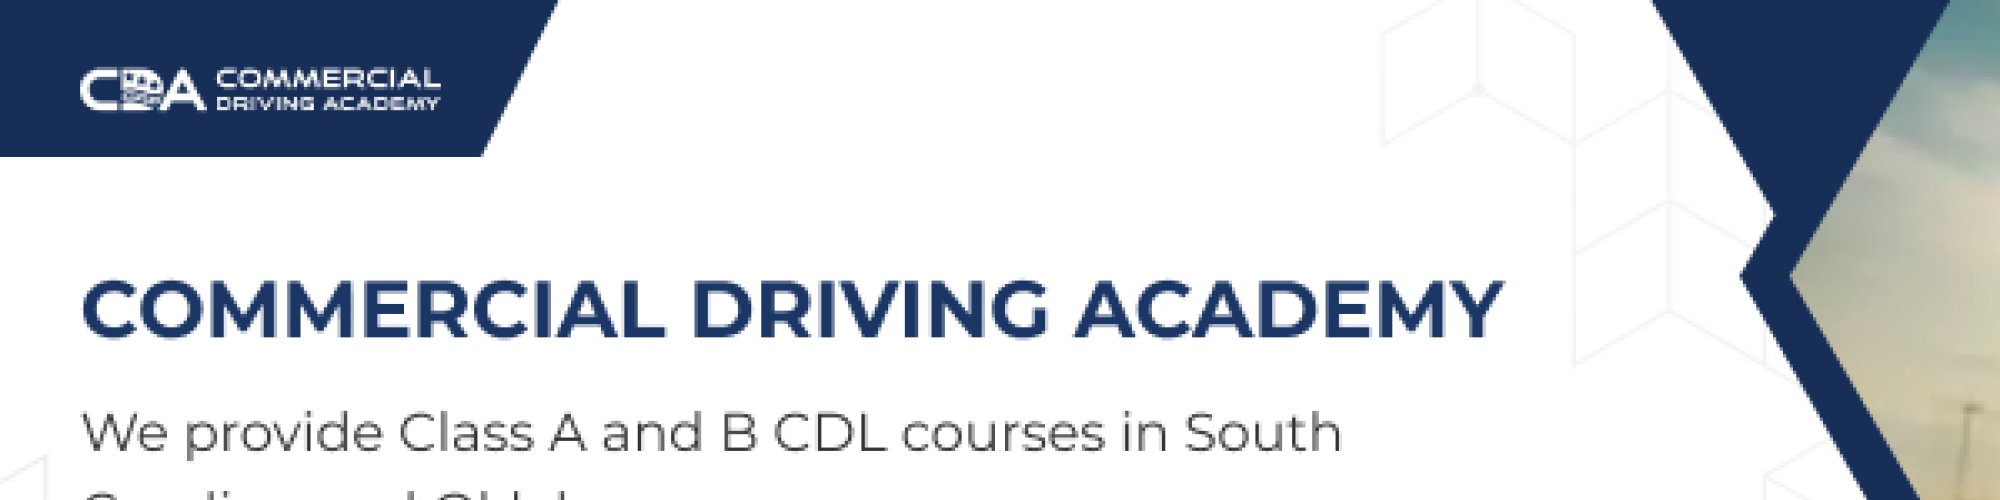 Commercial Driving Academy